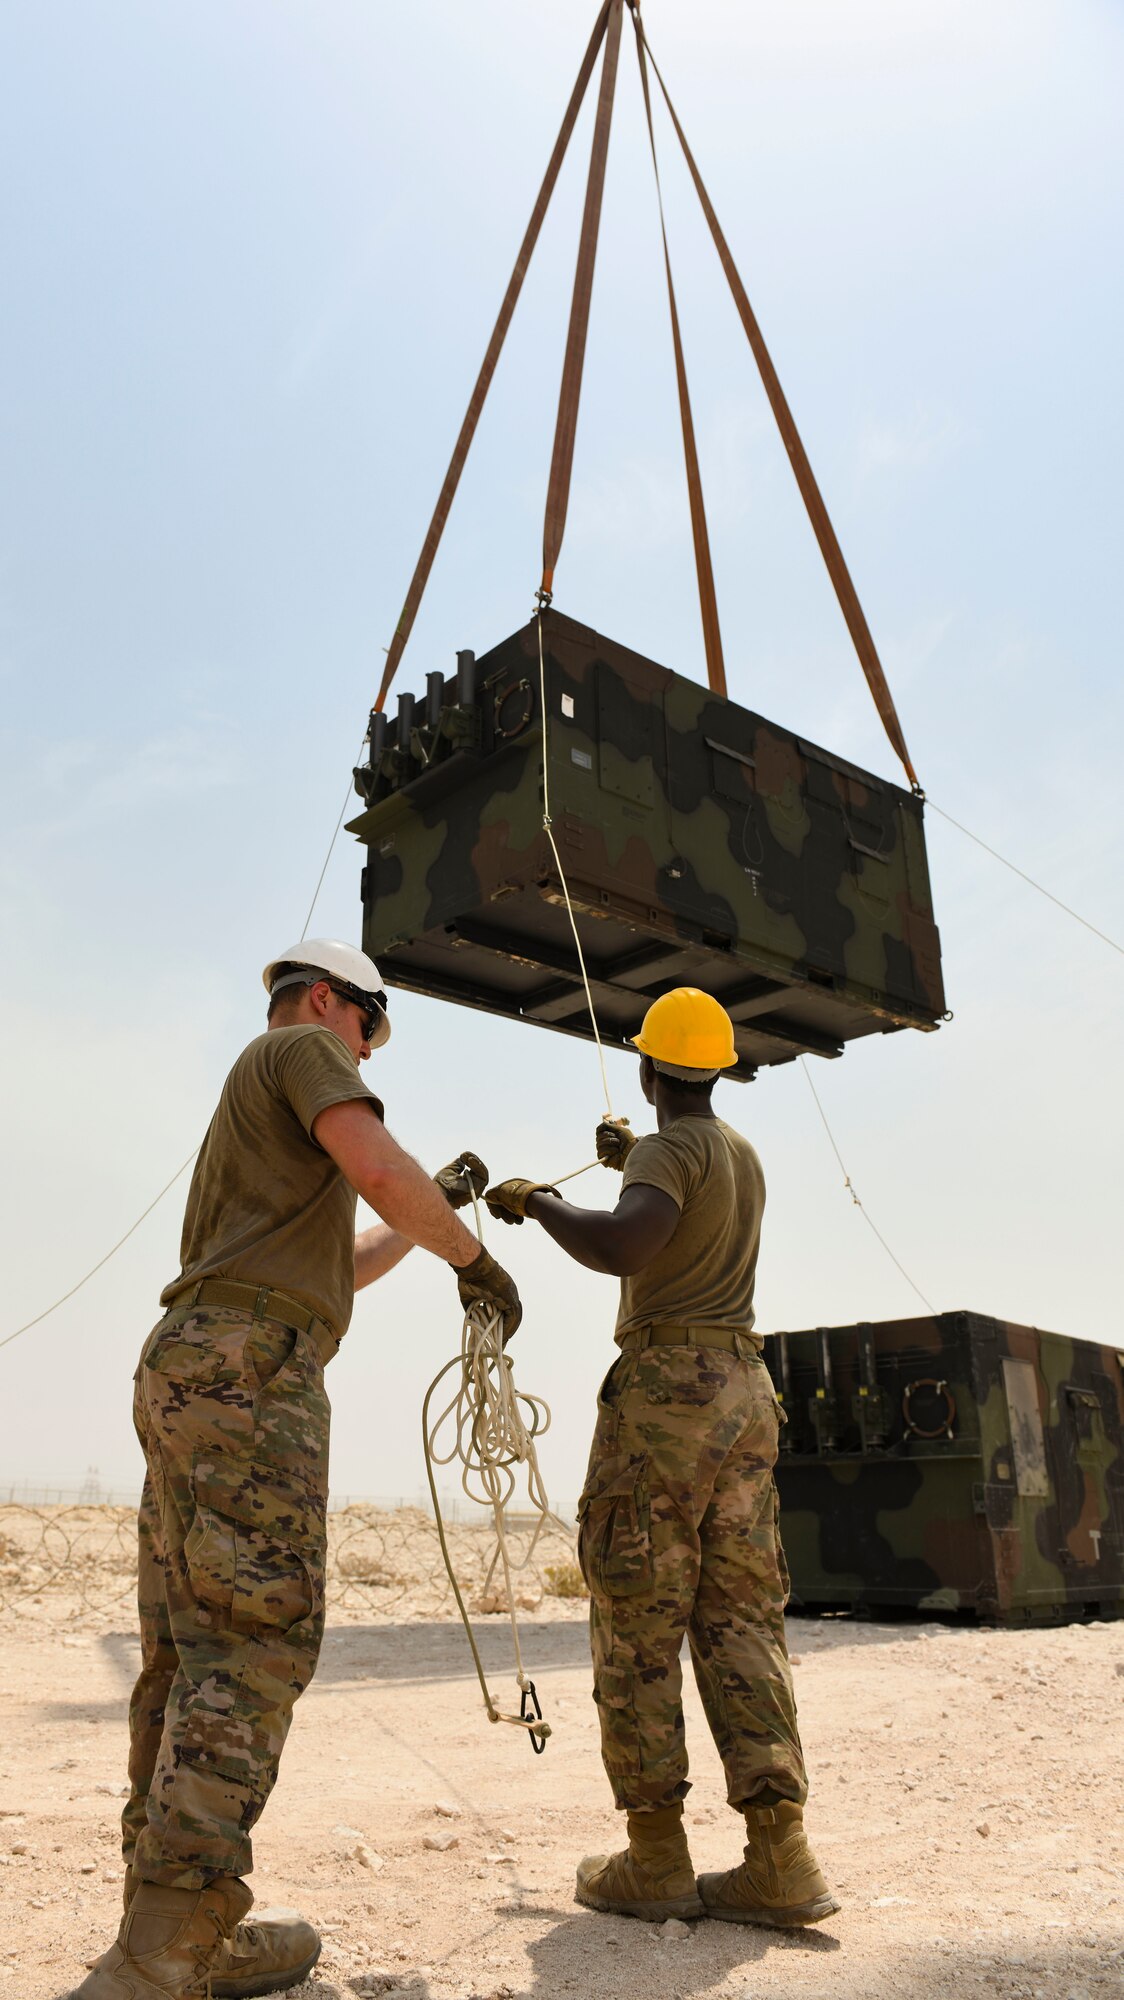 U.S. Air Force Airman 1st Class Alex Wolfe and Airman 1st Class Tahj Ballard, 727th Expeditionary Air Control Squadron, Detachment 3 radar technician and power production technician, respectively, pull tight a rope securing a new AN/TPS-75 radar system as it’s lowered into place July 27, 2021, at Al Udeid Air Base, Qatar. 727th EACS radar technicians perform several hours of maintenance and calibration daily to ensure the radar systems perform at optimal levels. (U.S. Air Force by Staff Sgt. Alexandria Lee)